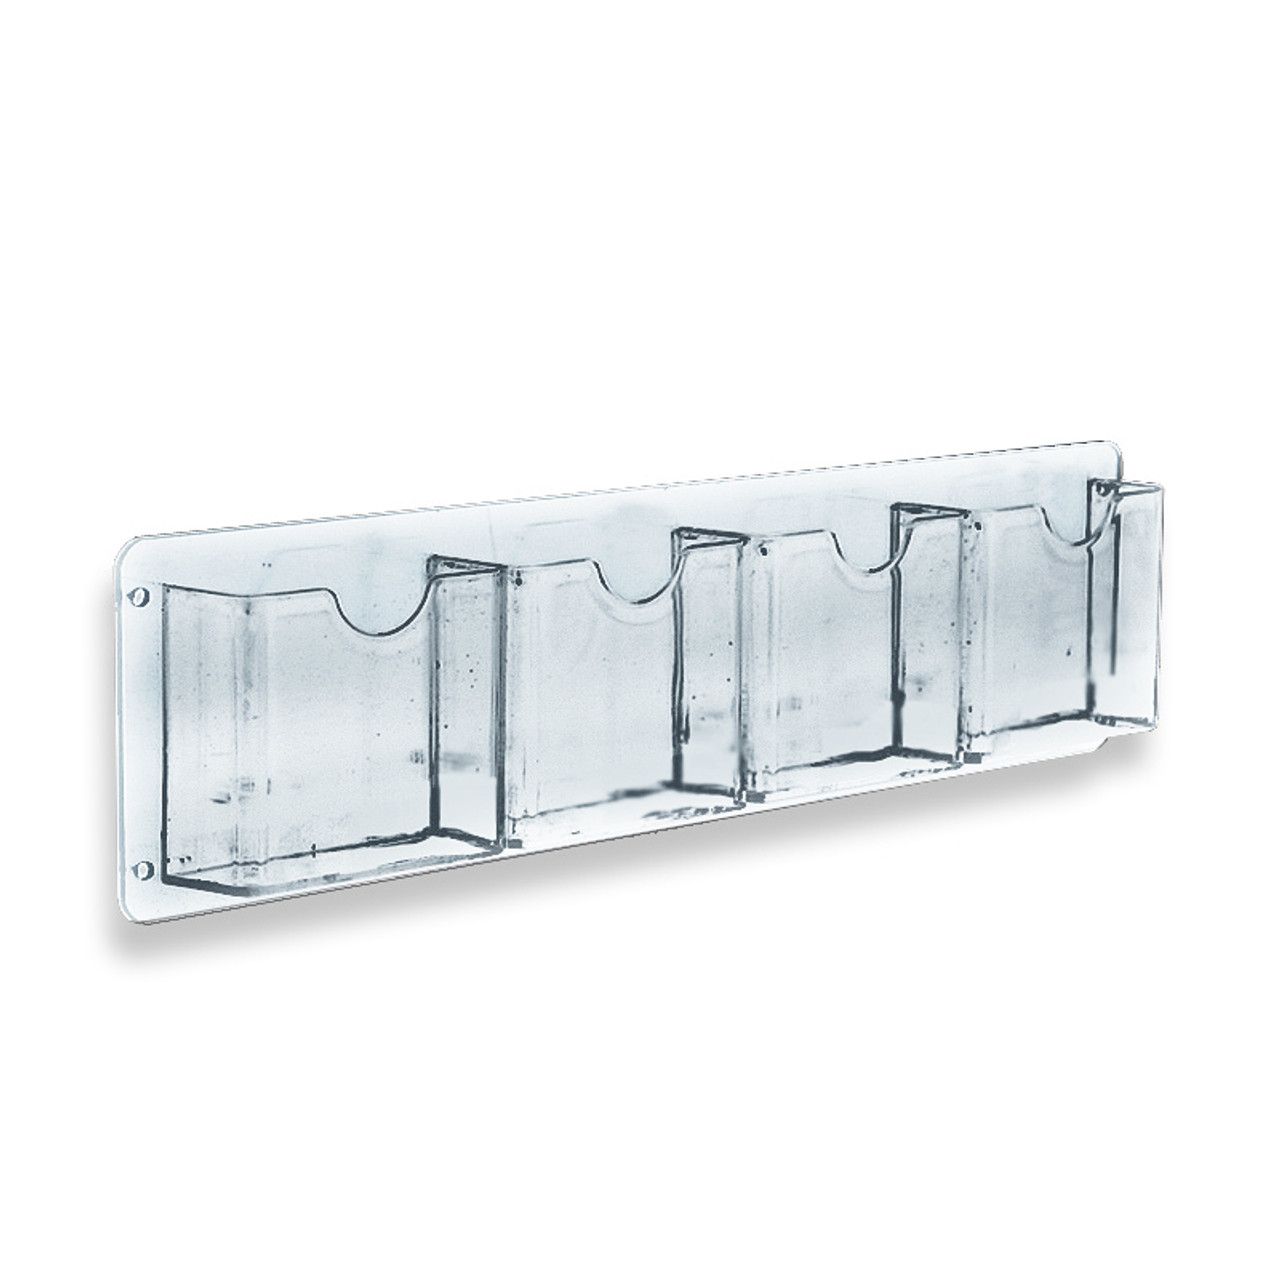 Four Pocket Tri-Fold Wall Rack. Clear Acrylic Wall Mount Brochure Holder  for Tri-Fold Size Pamphlets, Horizontal Alignment. Overall Size: 19.5